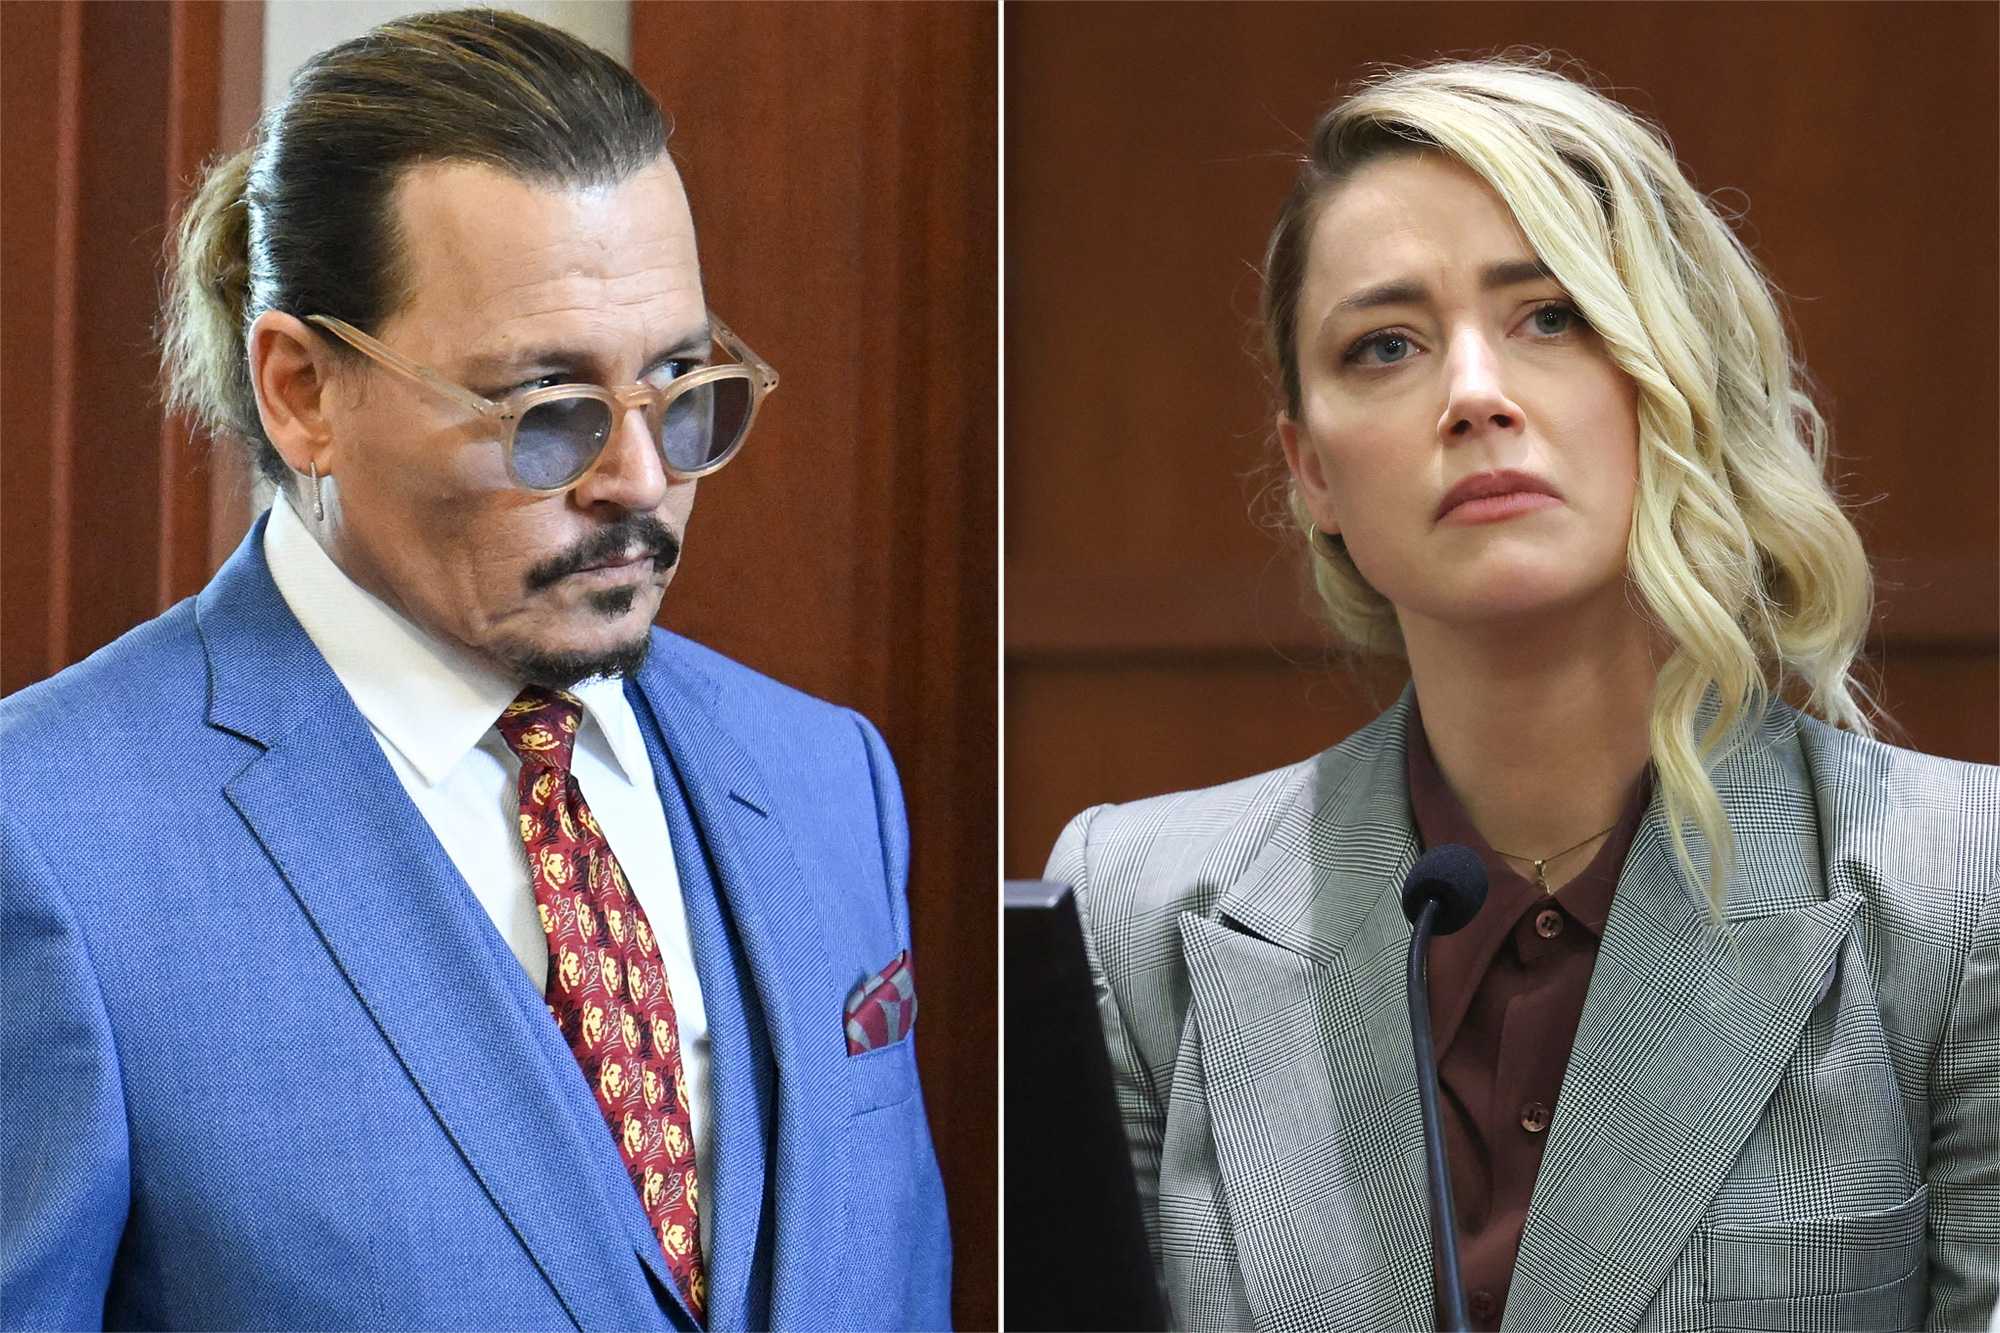 Johnny Depp and Amber Heard (Source: Entertainment Weekly)